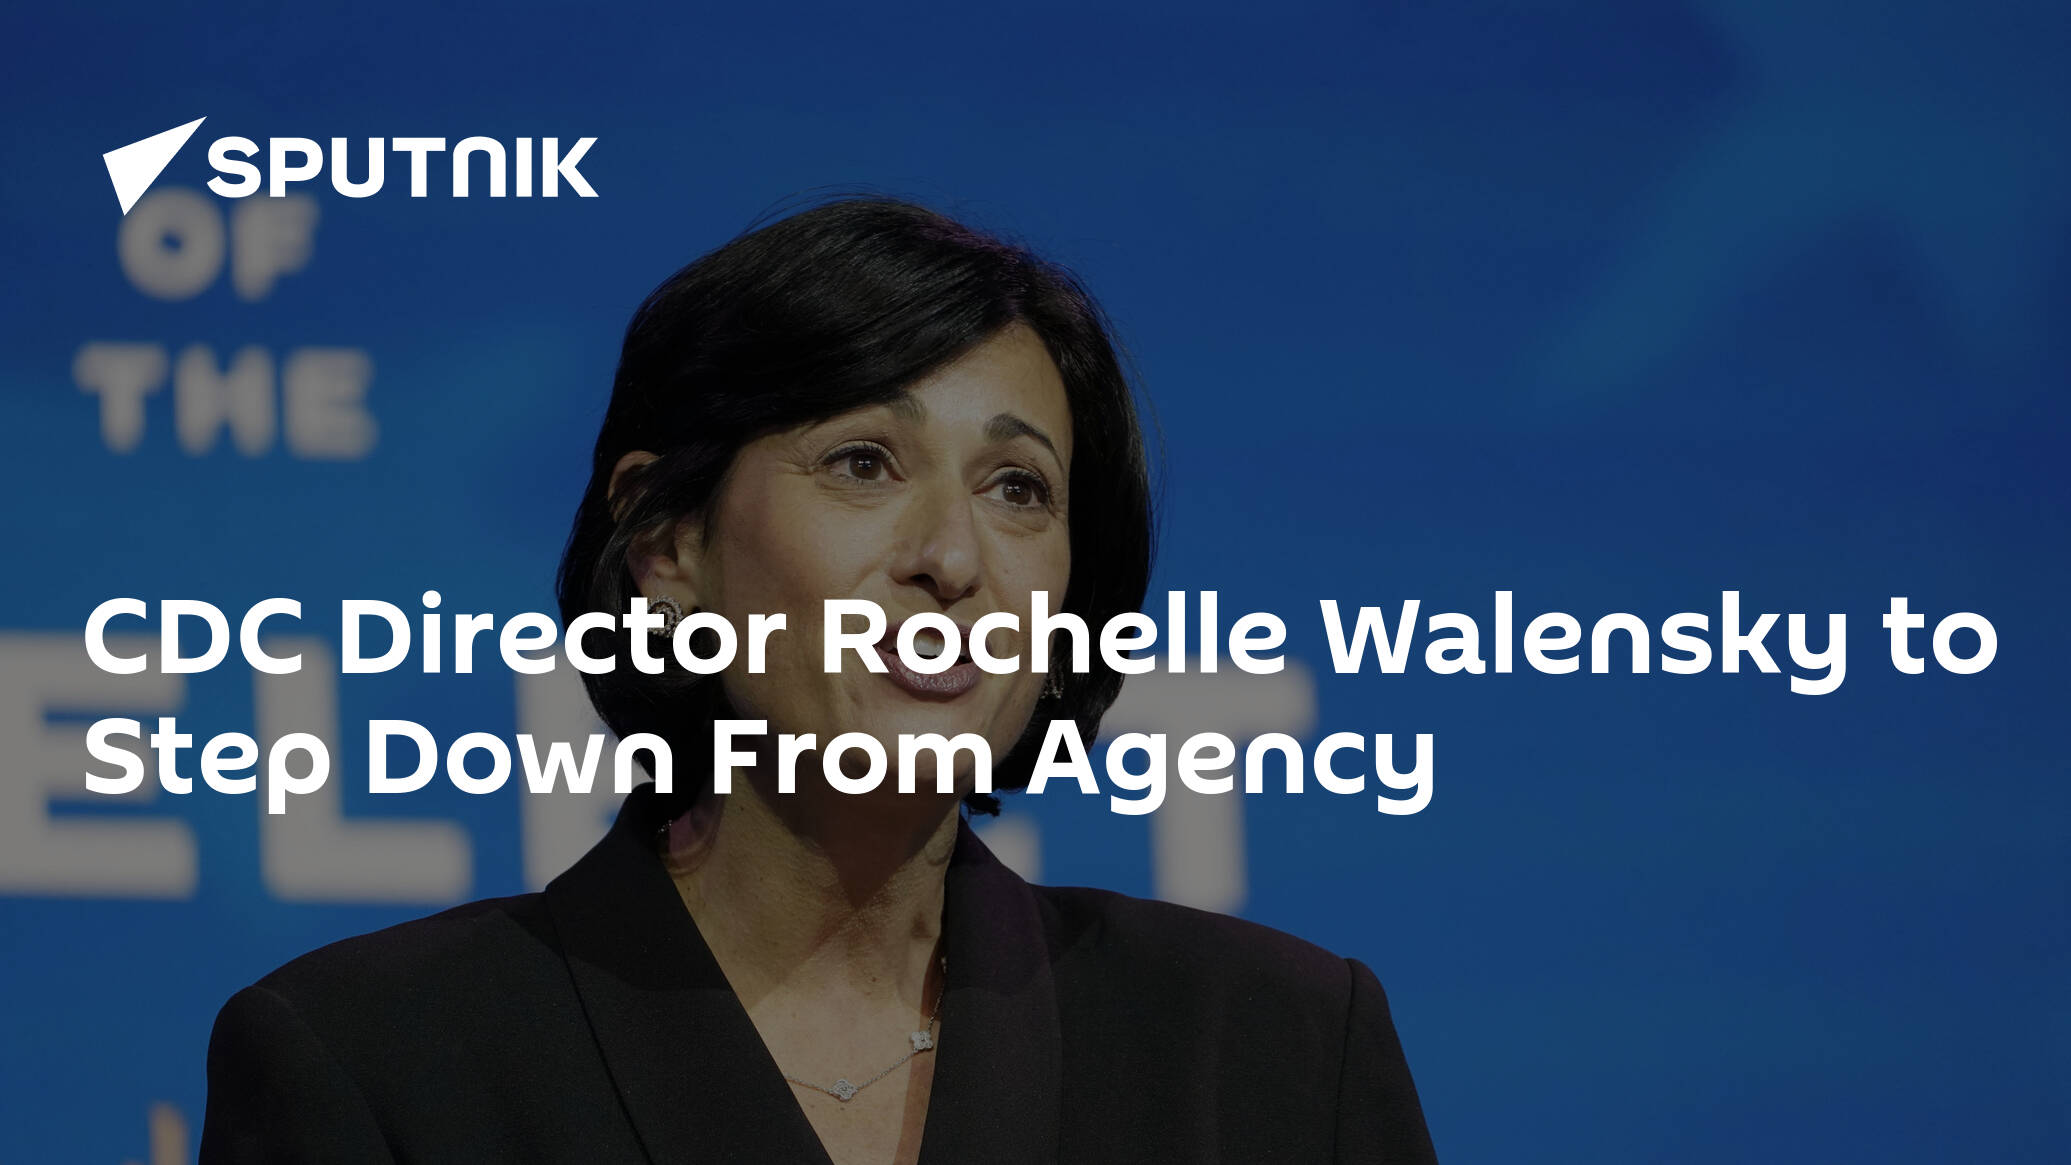 CDC Director Rochelle Walensky to Step Down From Agency